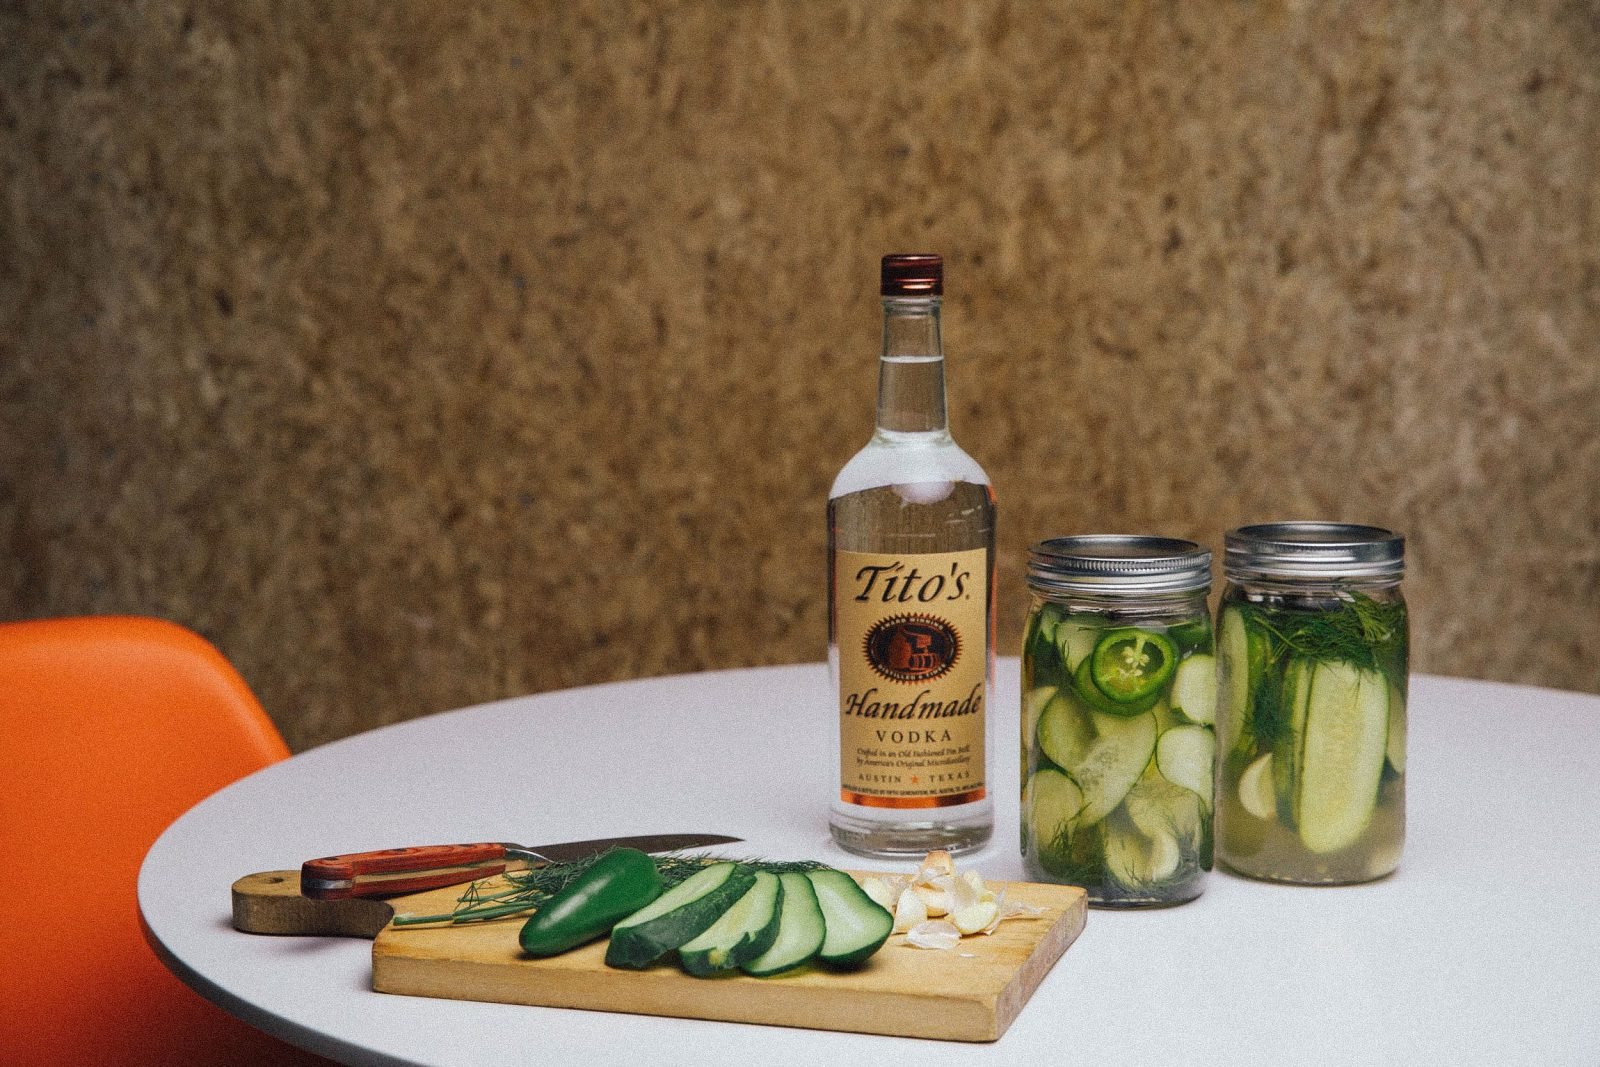 How to Make Pickles with Tito